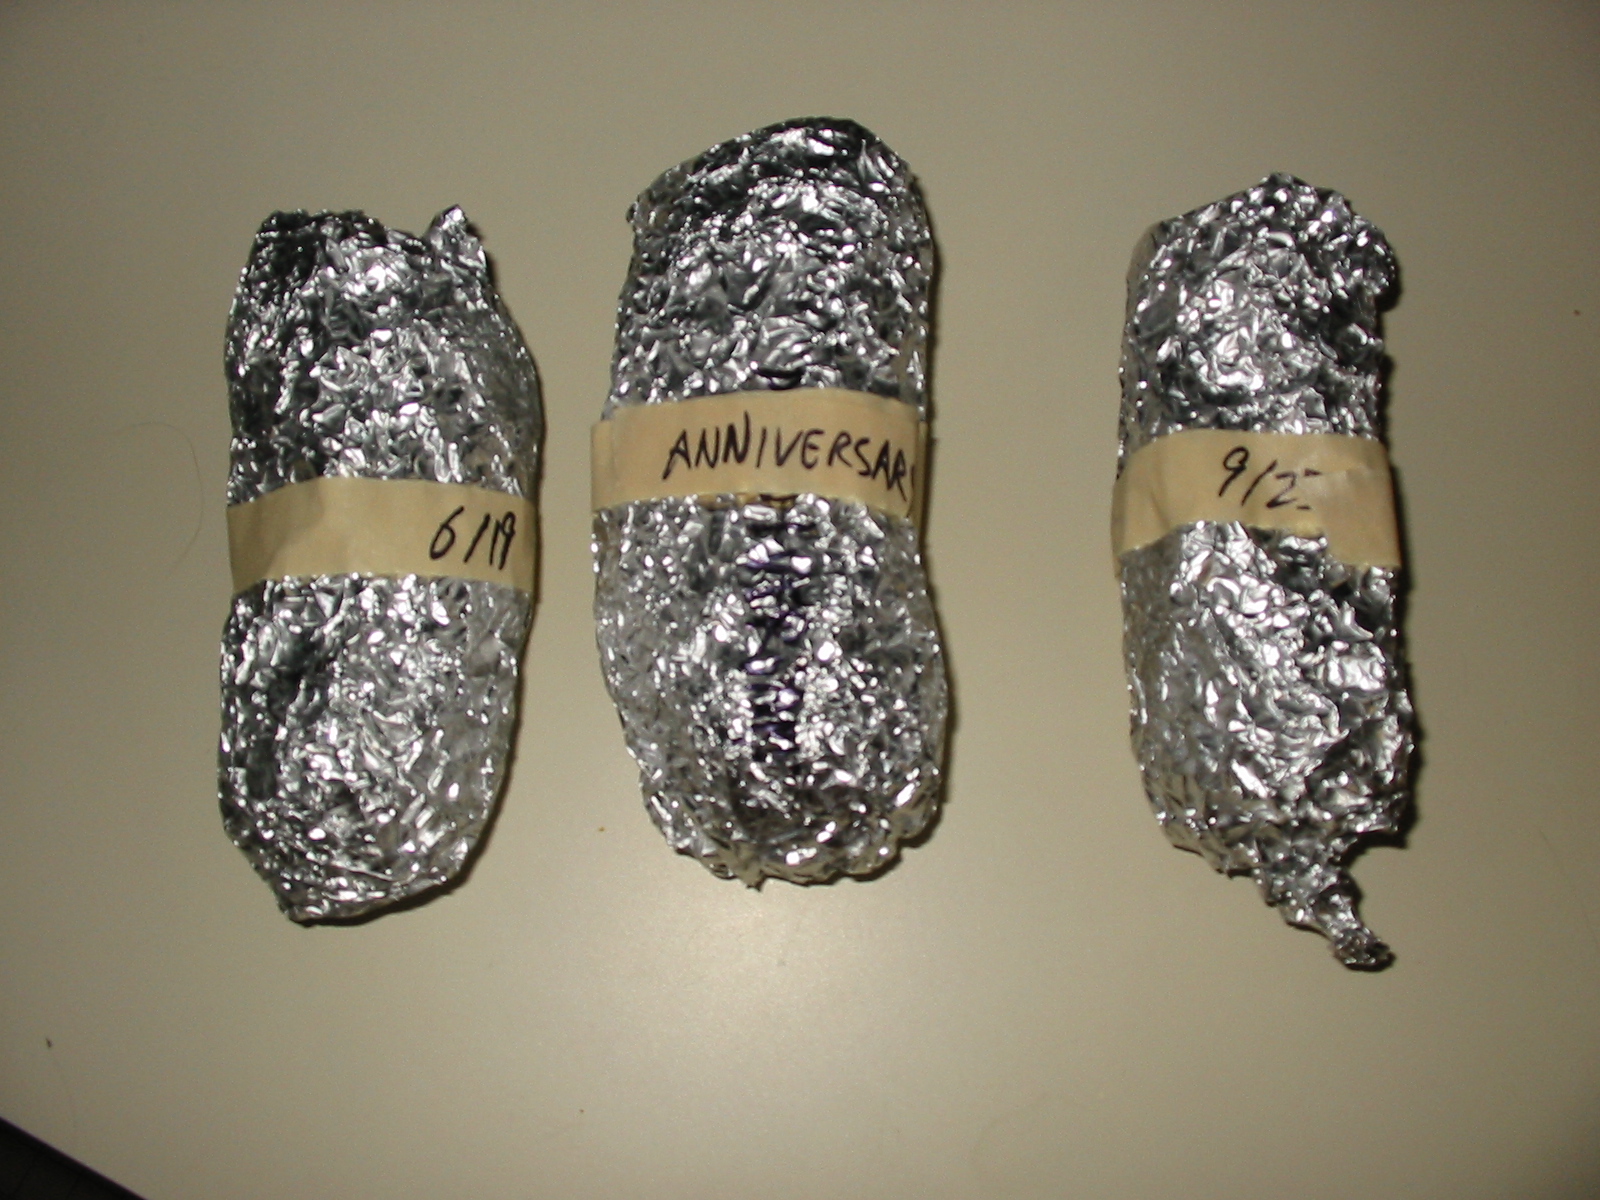 Ladylocks wrapped in aluminum foil and labeled